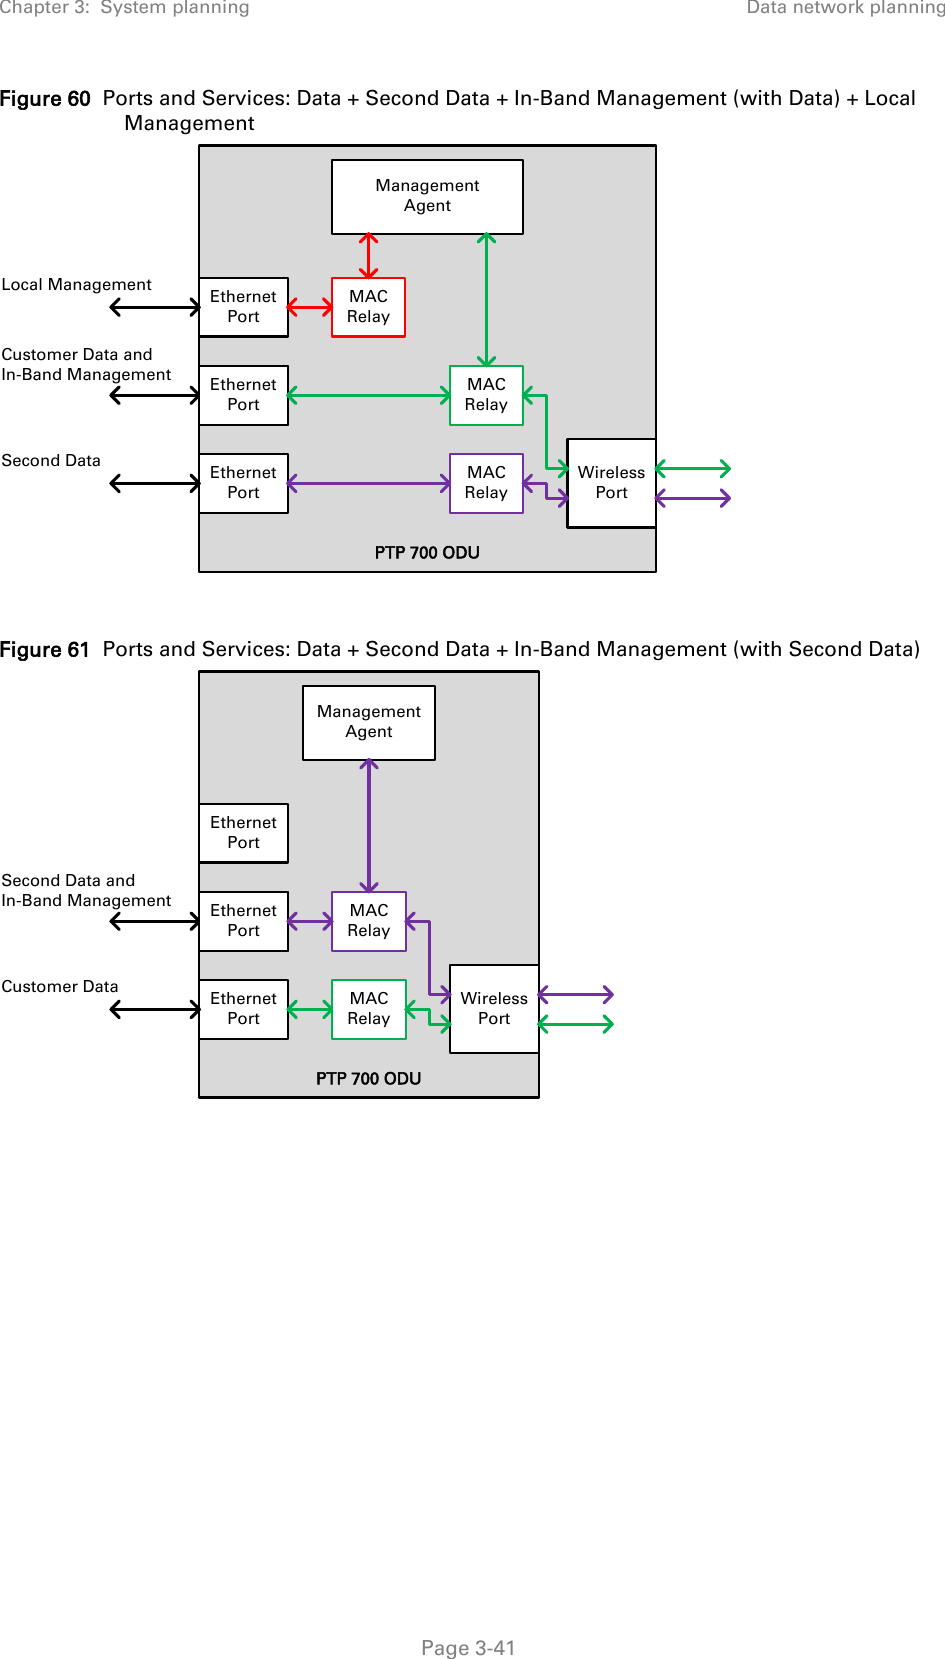 Chapter 3:  System planning Data network planning  Figure 60  Ports and Services: Data + Second Data + In-Band Management (with Data) + Local Management   Figure 61  Ports and Services: Data + Second Data + In-Band Management (with Second Data)   PTP 700 ODUManagementAgentEthernetPortEthernetPortEthernetPortMAC RelayLocal ManagementMAC RelaySecond DataEthernetPortMAC RelayCustomer Data andIn-Band ManagementWirelessPortPTP 700 ODUManagementAgentEthernetPortEthernetPortEthernetPortMAC RelayCustomer DataEthernetPortMAC RelaySecond Data andIn-Band ManagementWirelessPort Page 3-41 